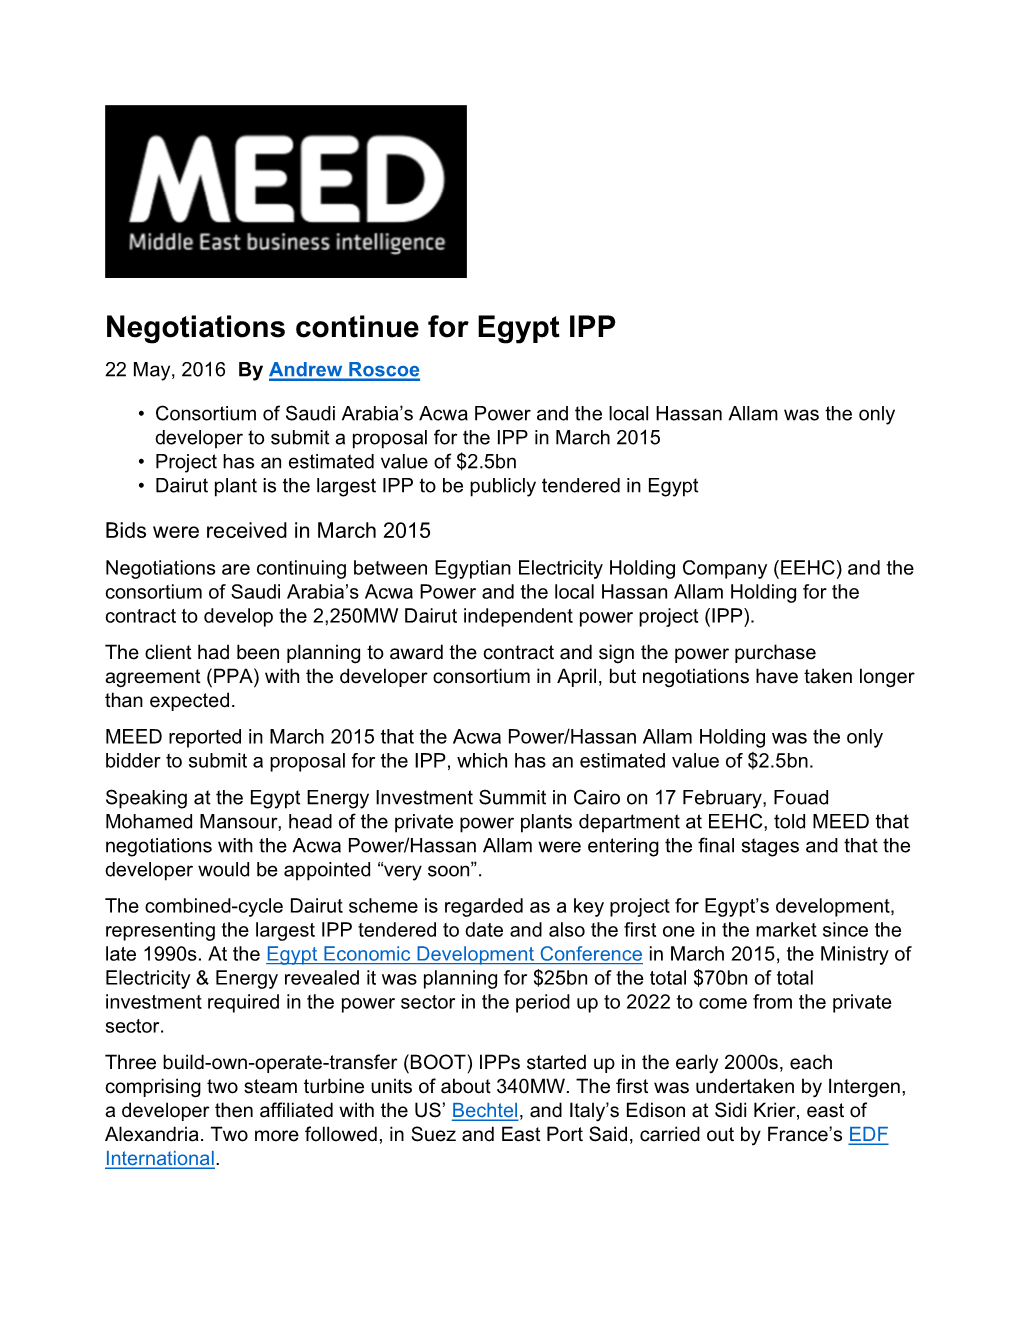 Negotiations Continue for Egypt IPP 22 May, 2016 by Andrew Roscoe